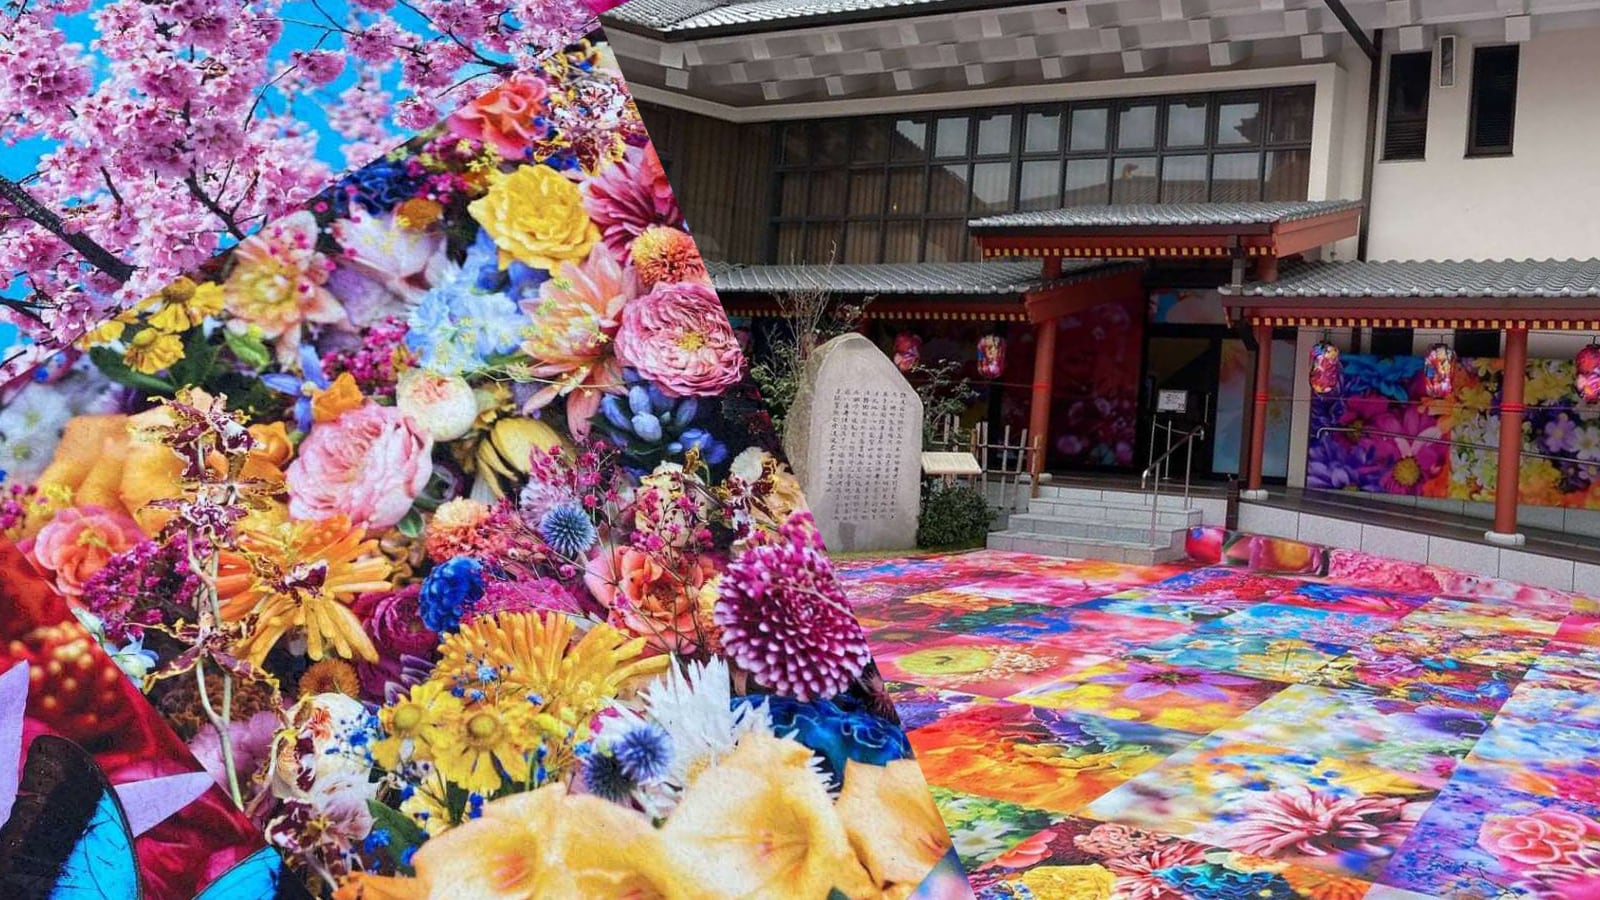 Mika Ninagawa's art works are located at Asukano Yusen, which is about a 3-minute walk from the hotel.